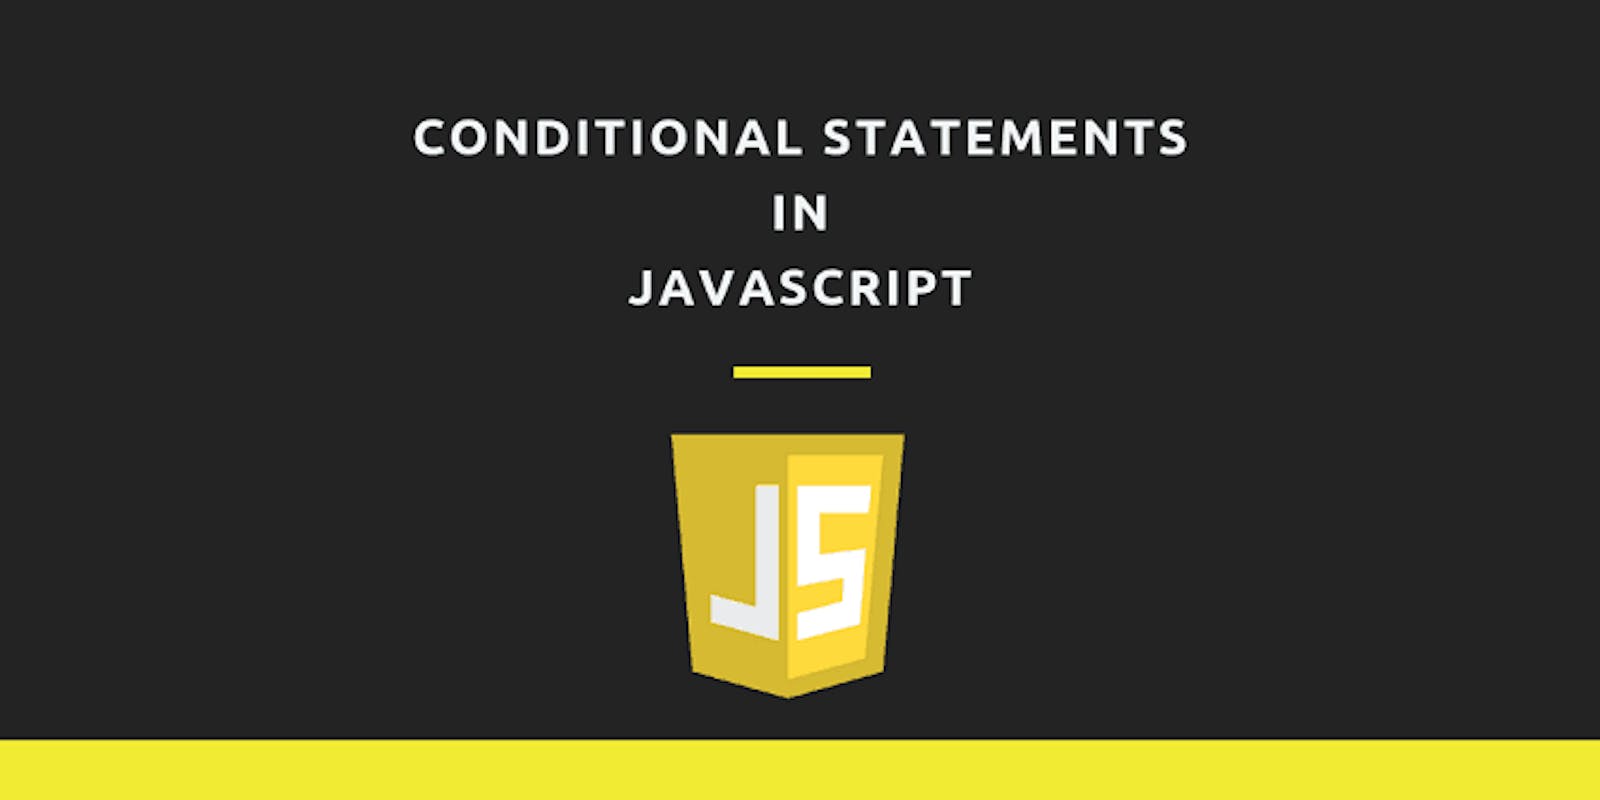 Conditional statements in JavaScript